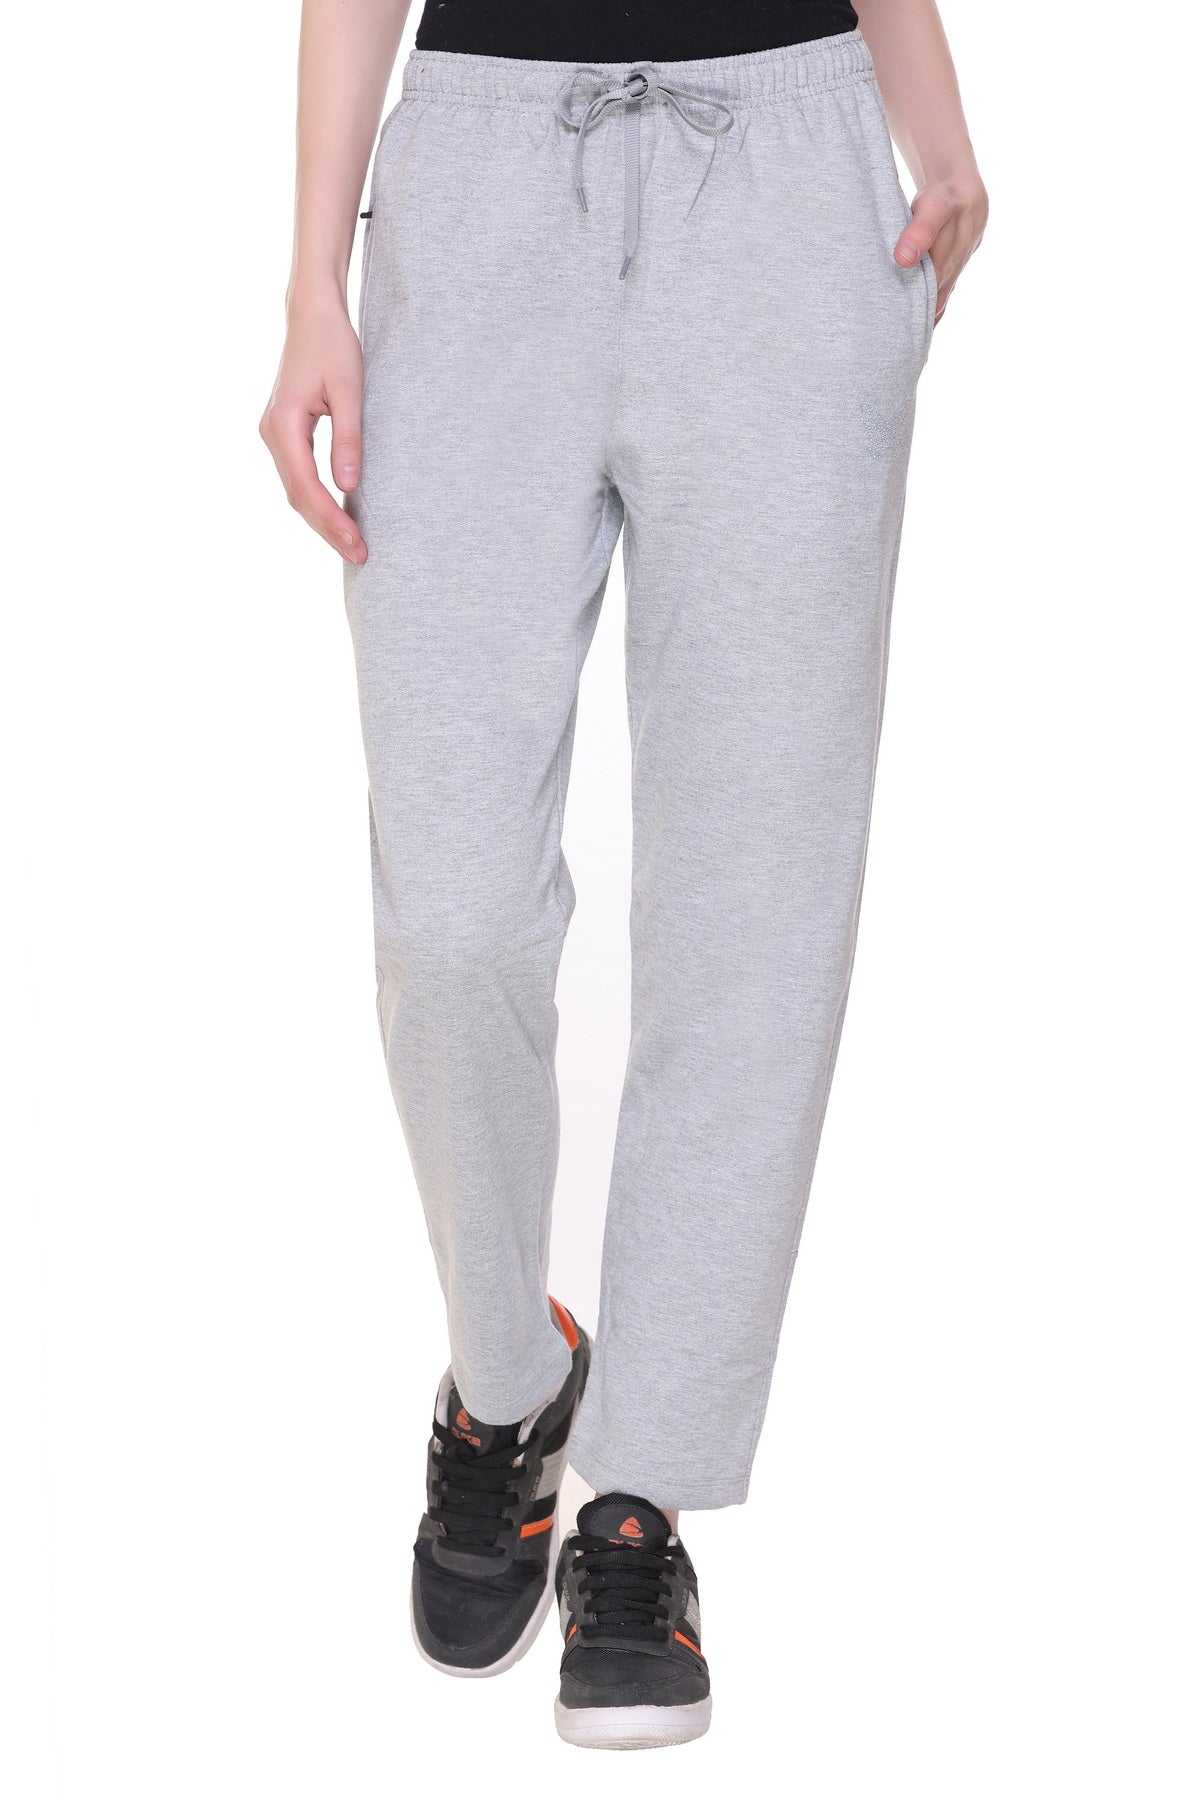 2021 Lowest Price] Nike Womens Track Pants Price in India & Specifications